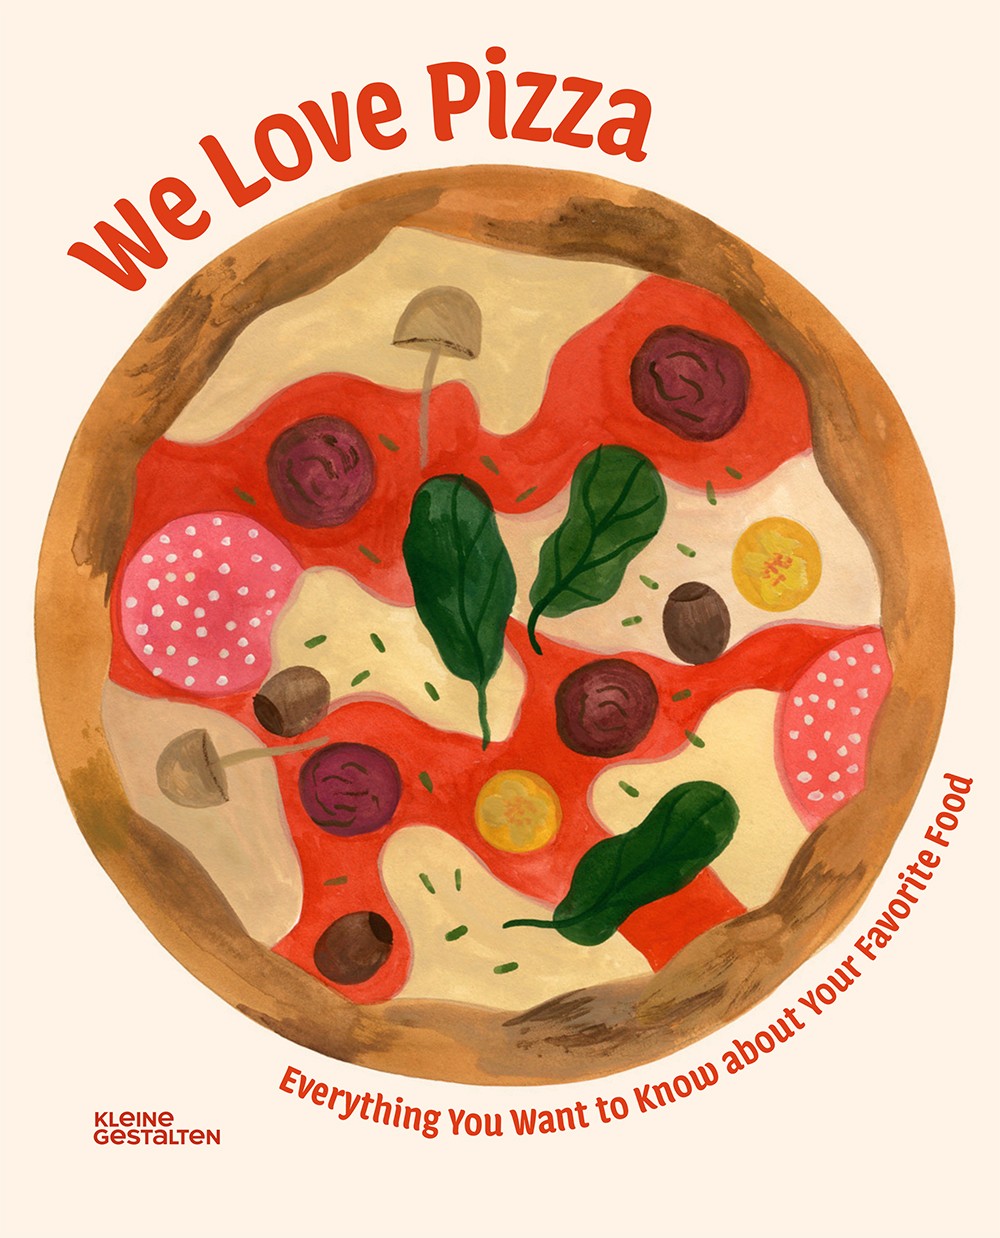 We Love Pizza: Everything You Want to Know about Your Favourite Food